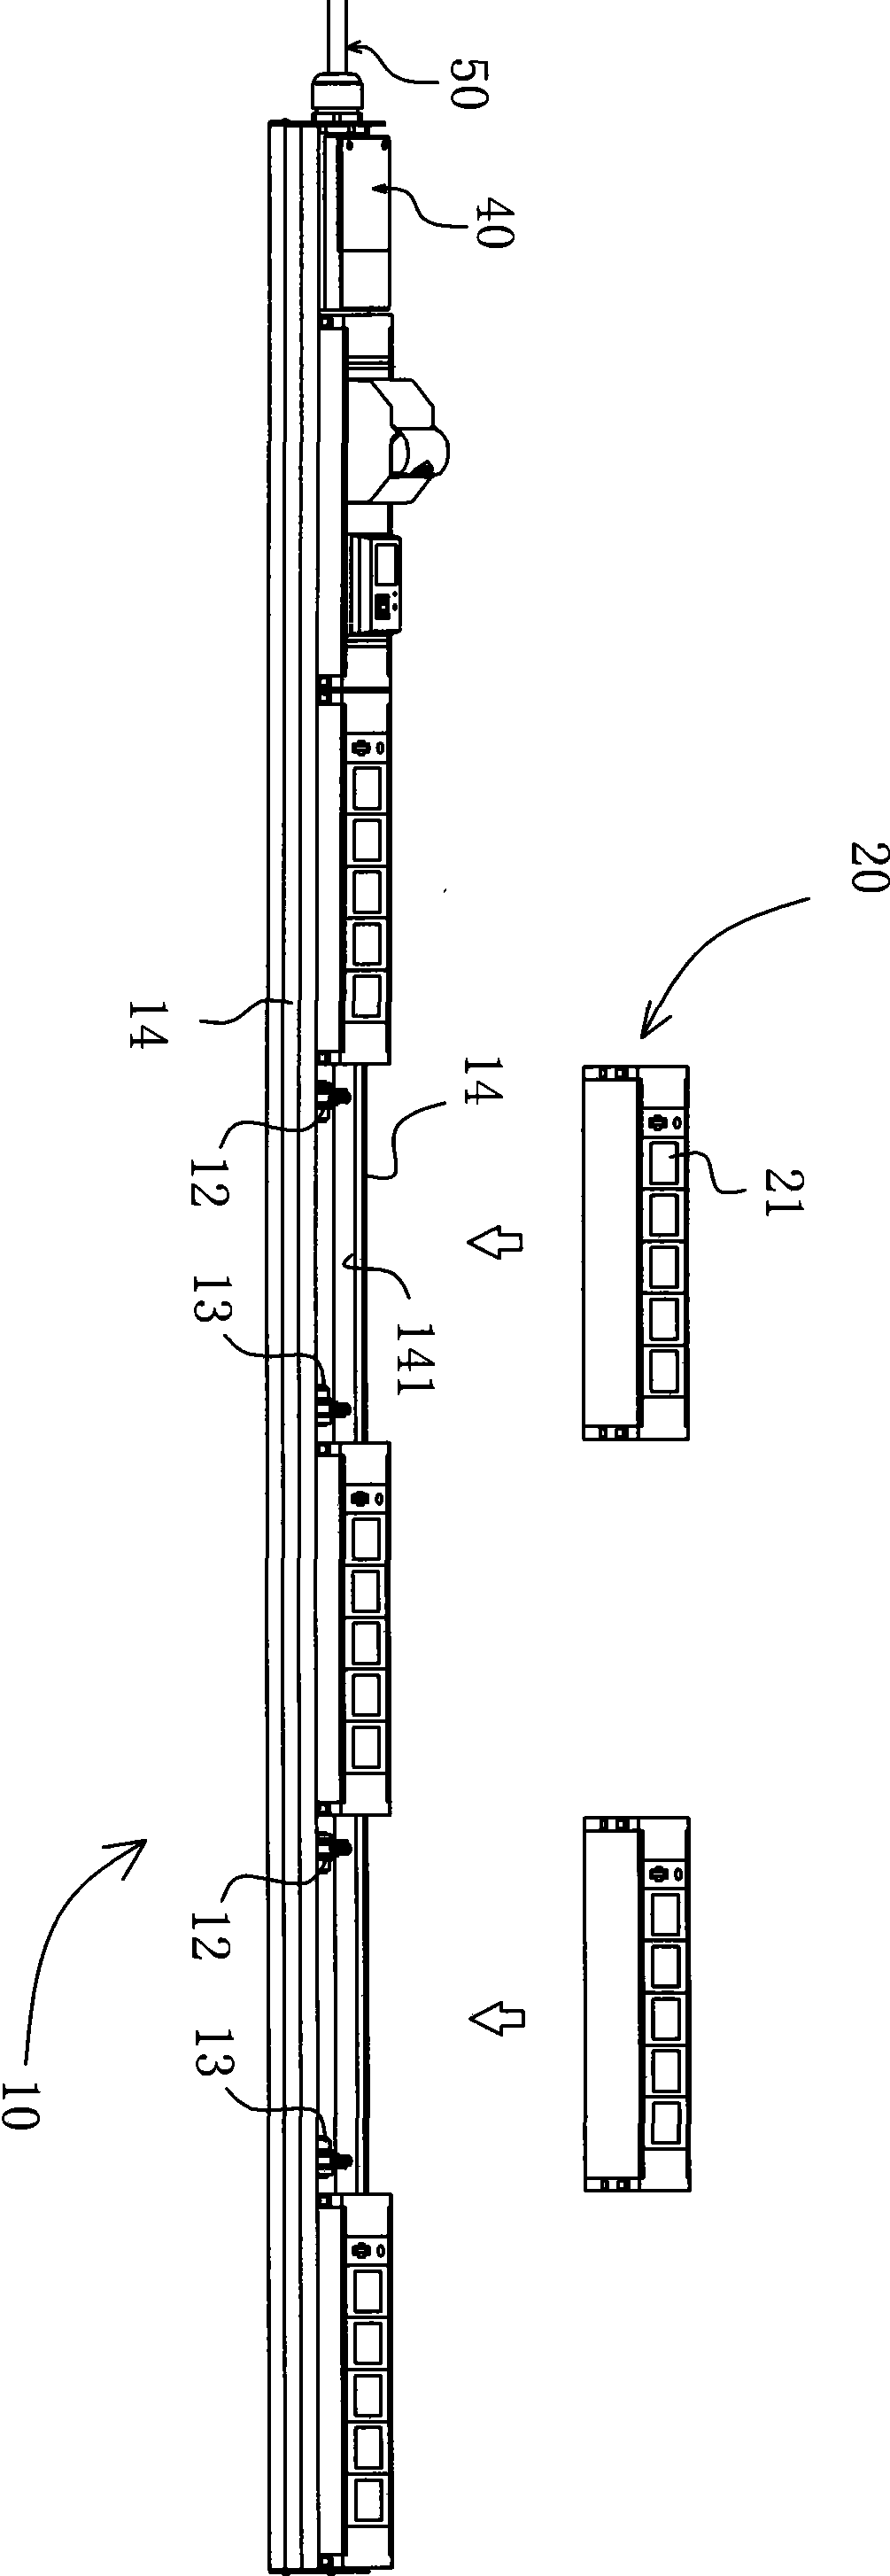 Modularized power control and distribution system